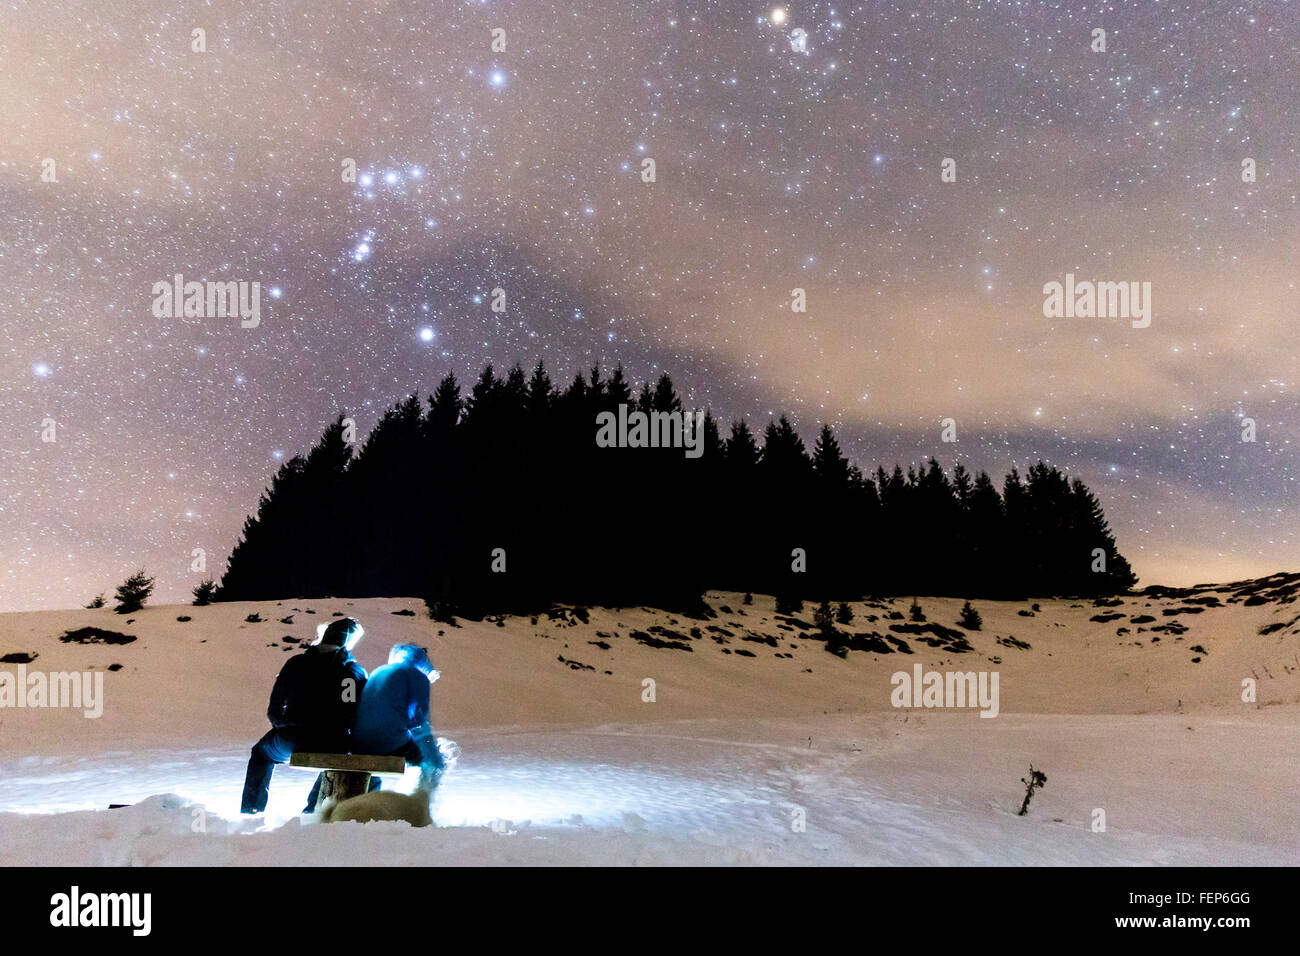 The Milky Way over the winter mountain landscape with pine trees. Two people sitting in the foreground watching the falling star Stock Photo